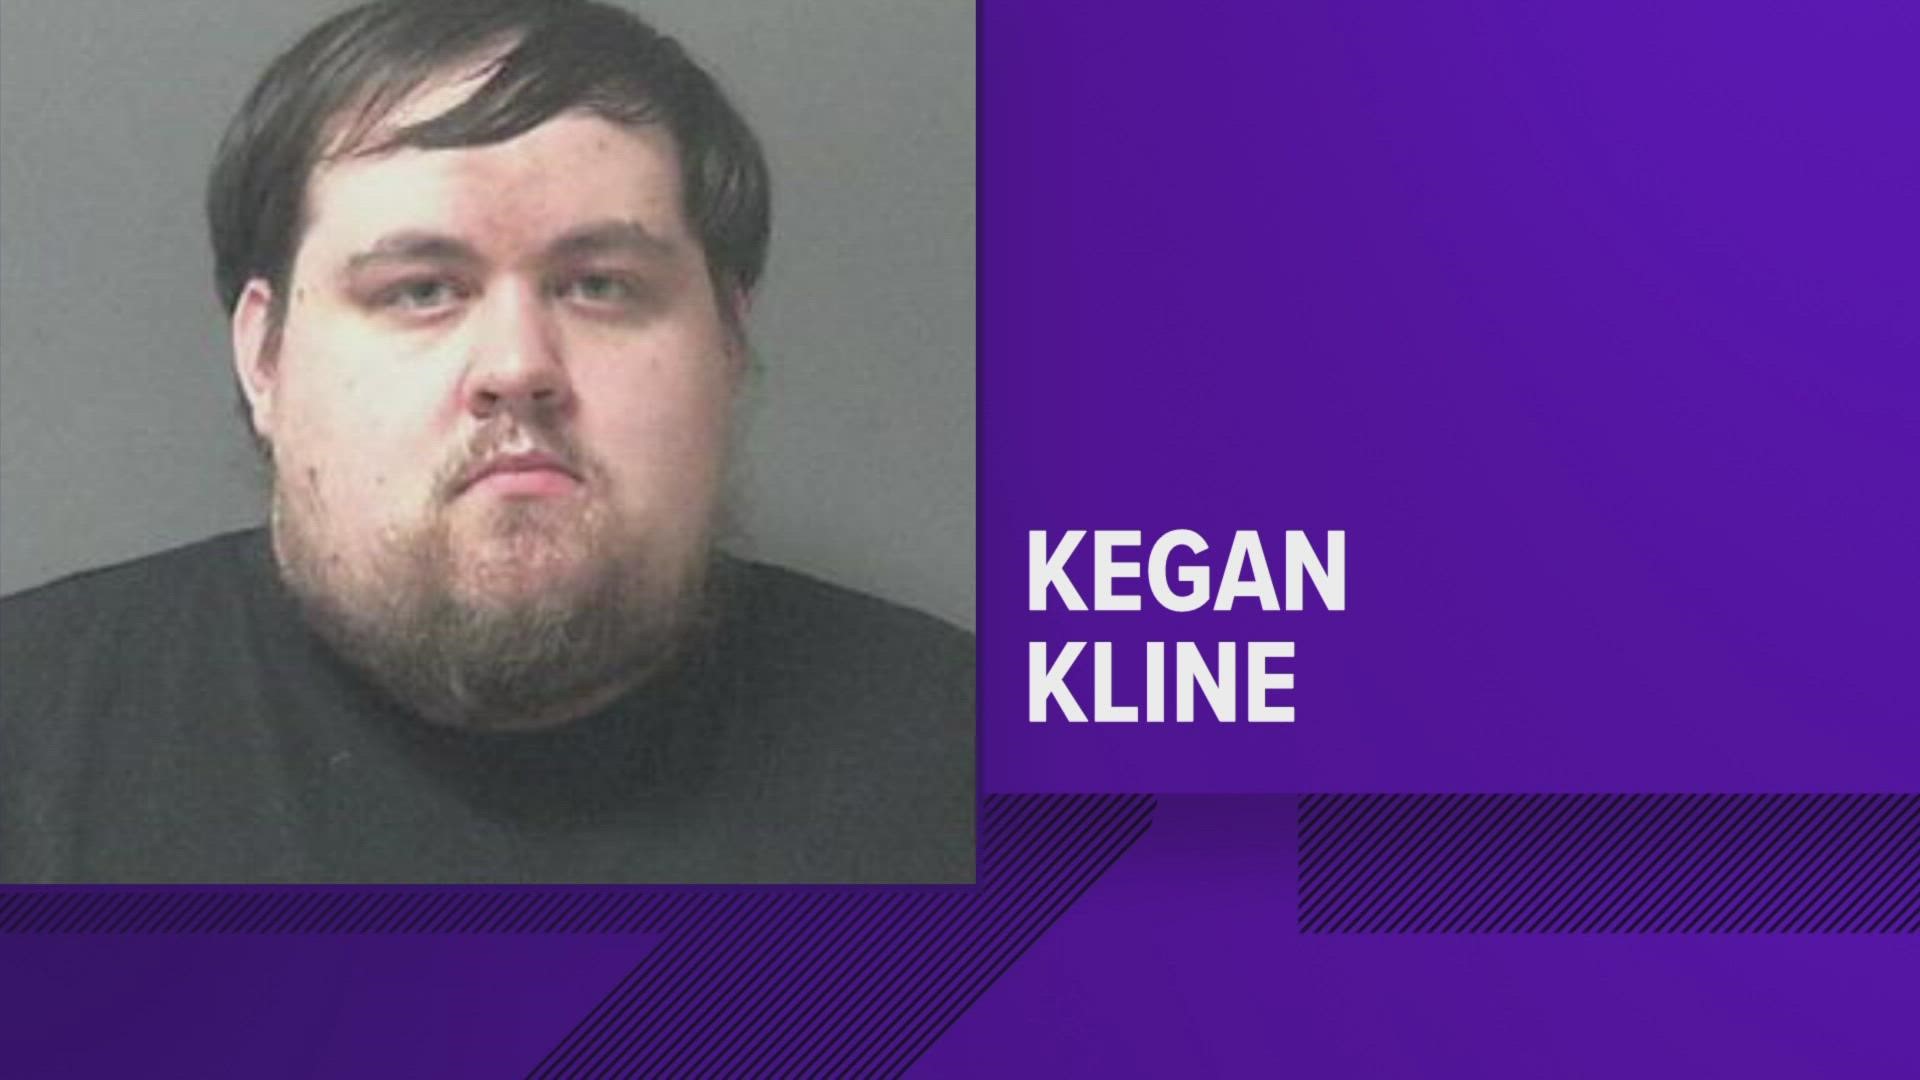 Kline faces charges of child pornography and exploitation.